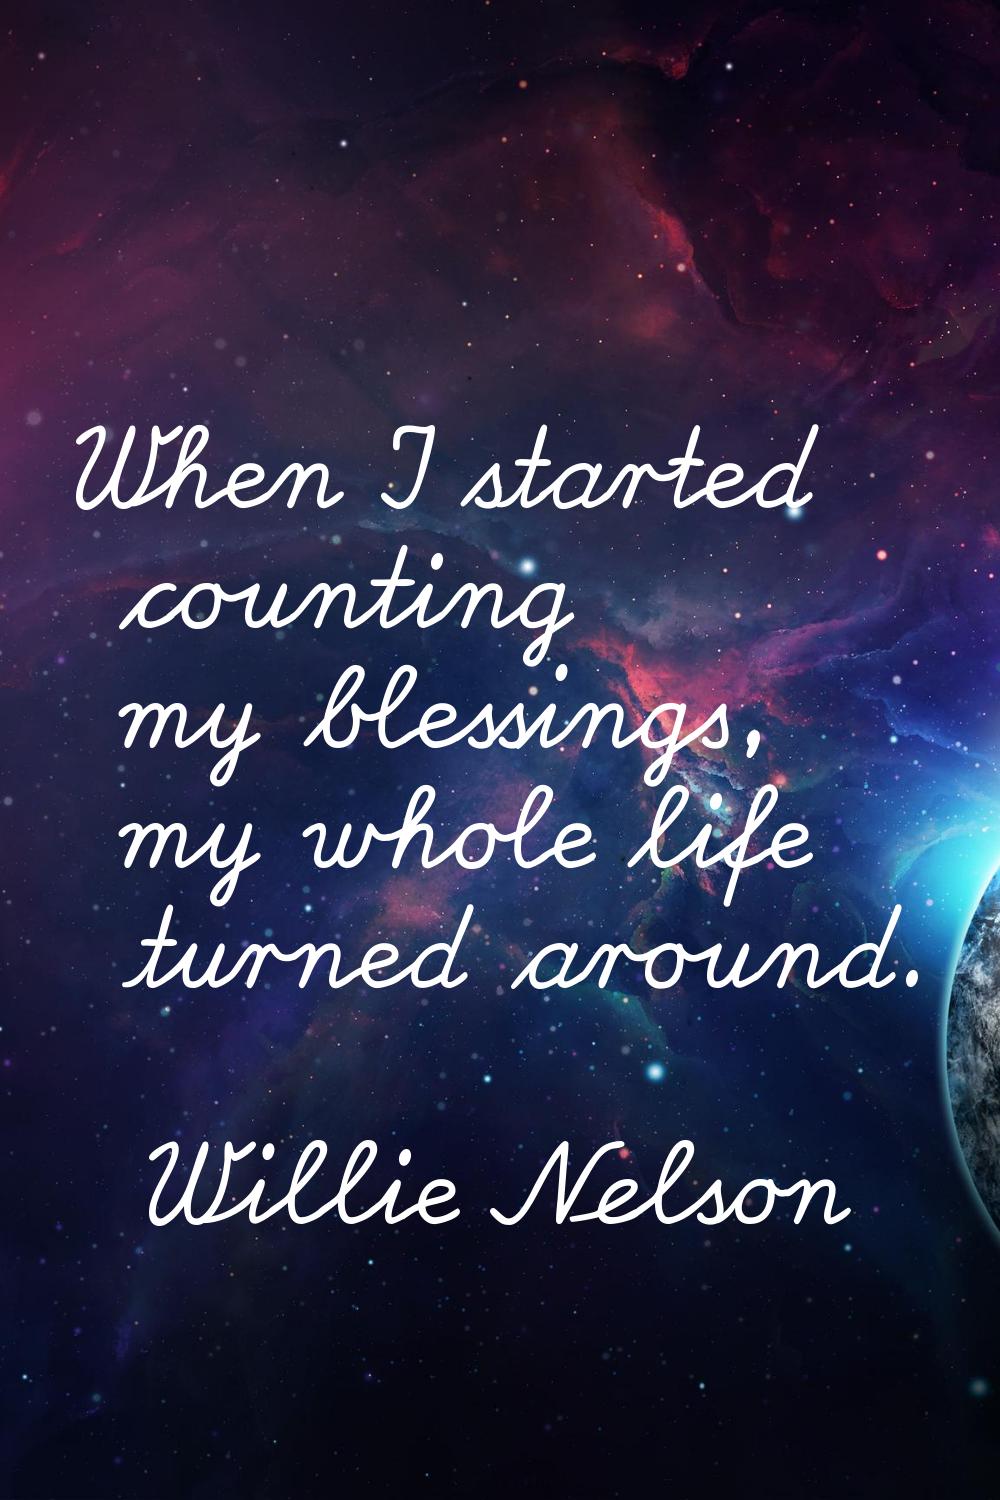 When I started counting my blessings, my whole life turned around.